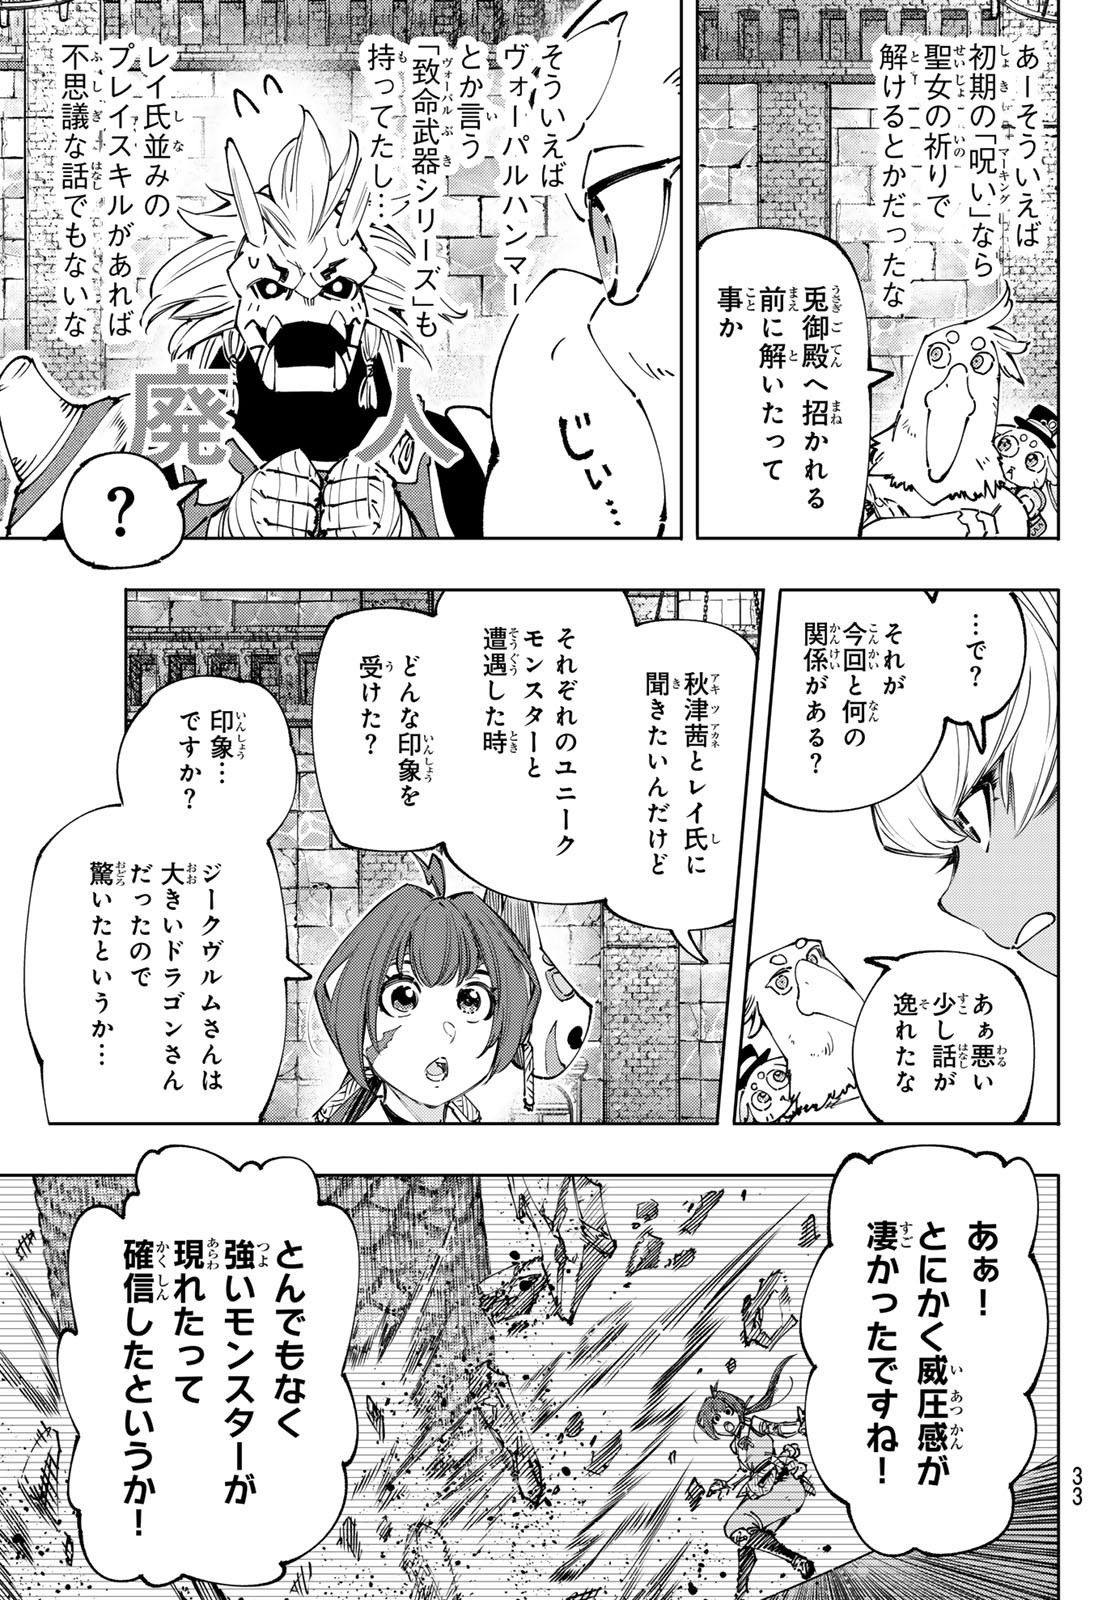 Weekly Shōnen Magazine - 週刊少年マガジン - Chapter 2024-24 - Page 33